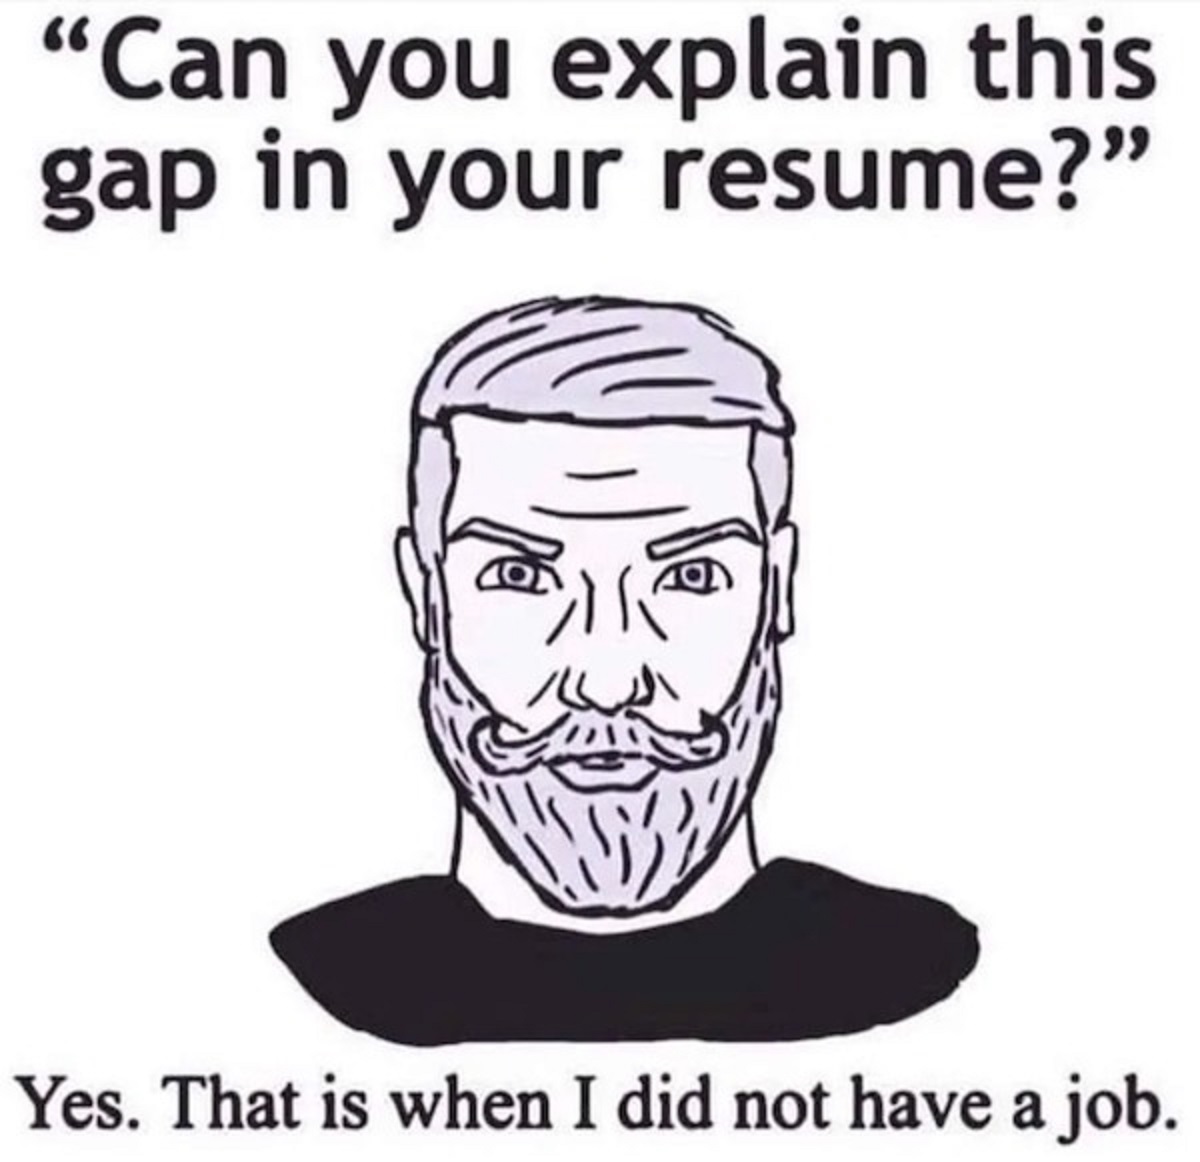 resumes meme funny - "Can you explain this gap in your resume?" Yes. That is when I did not have a job.